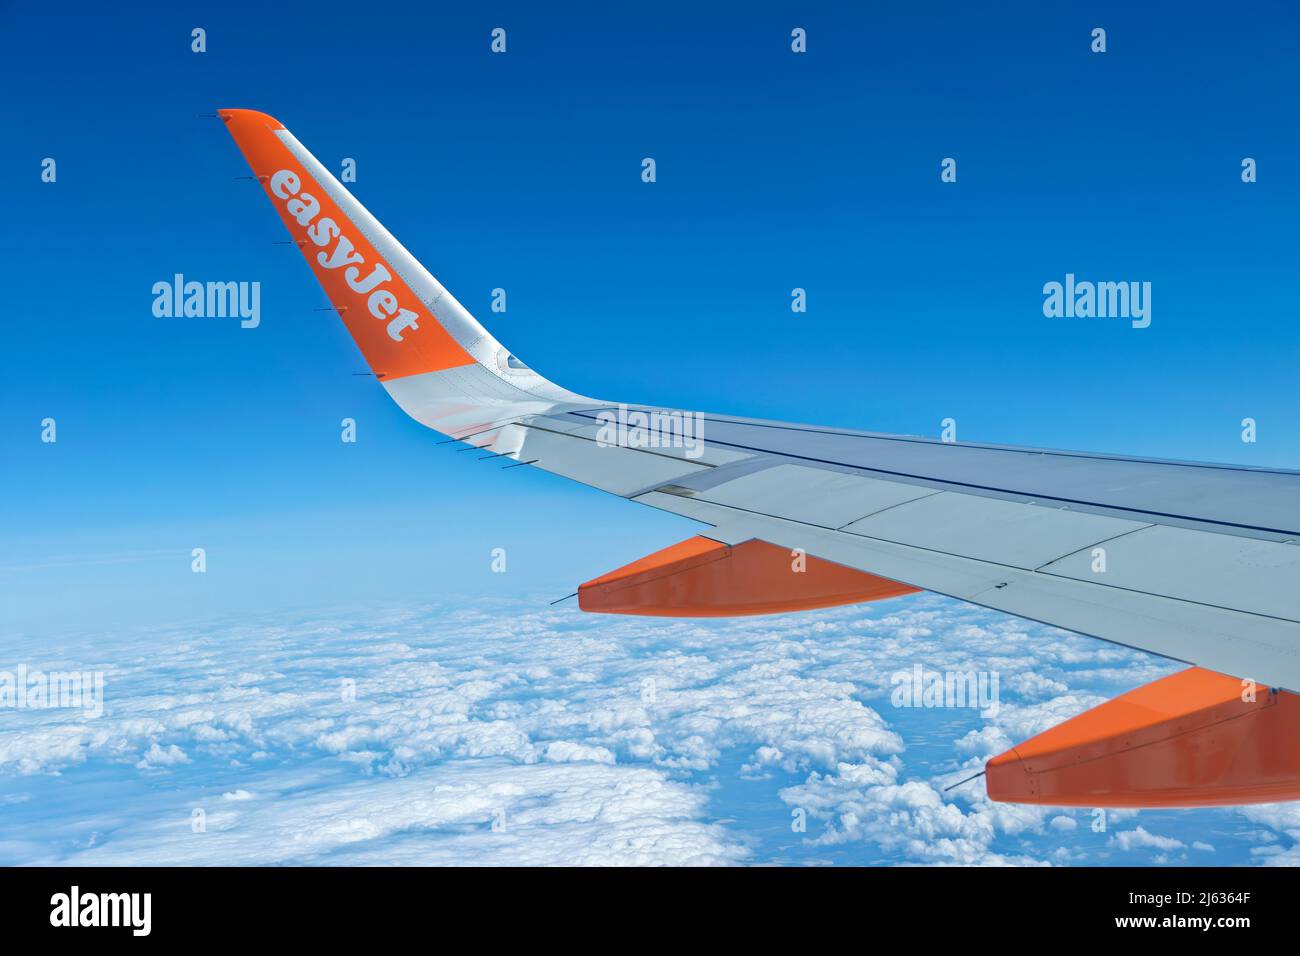 Easyjet Airbus A320-214 wing detail in flight. Stock Photo